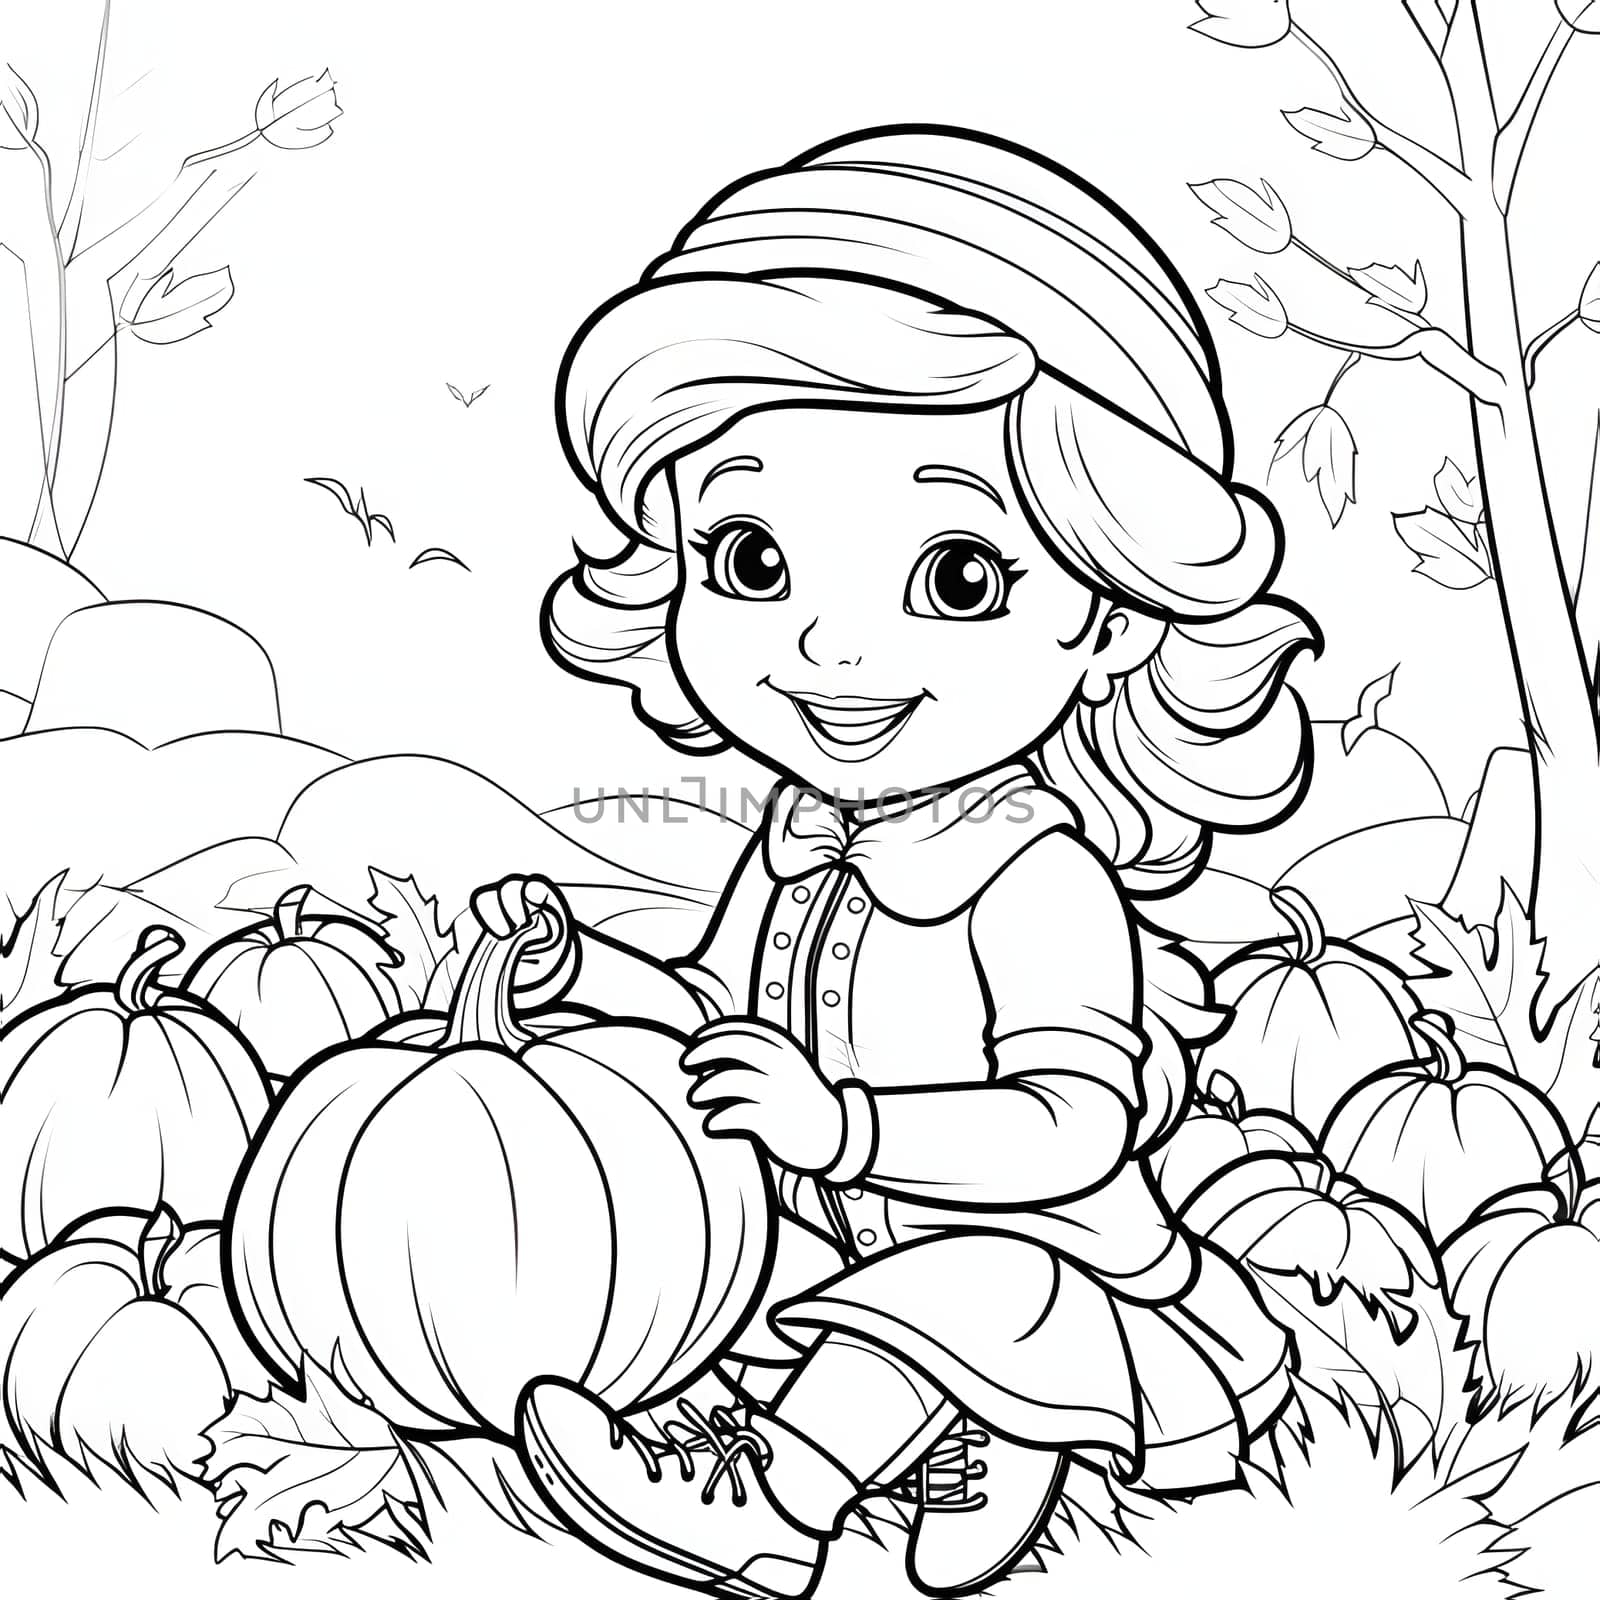 Black and white coloring card of a cheerful girl with a pumpkin. Pumpkin as a dish of thanksgiving for the harvest, picture on a white isolated background. An atmosphere of joy and celebration.